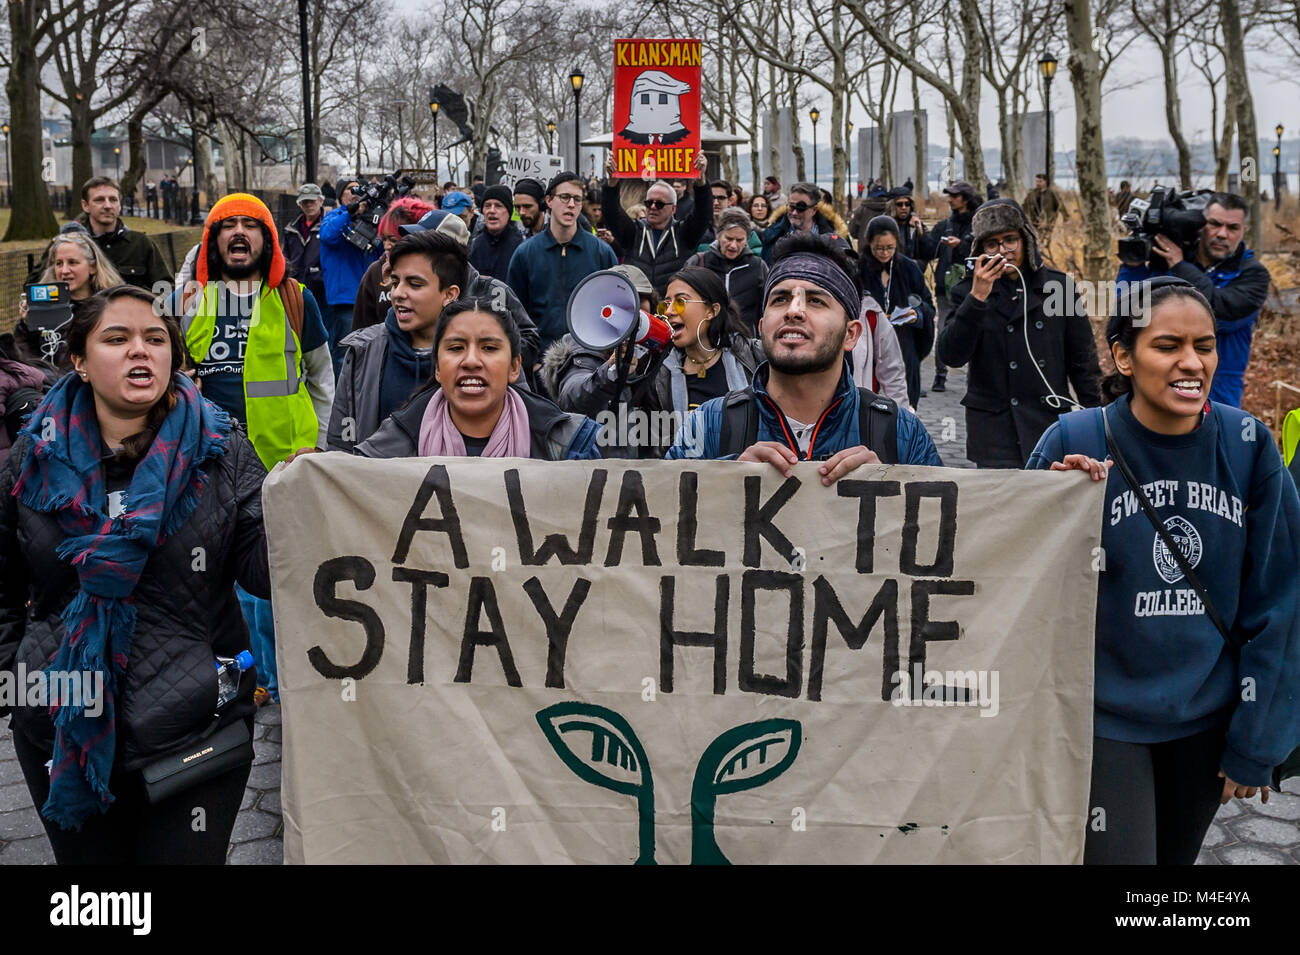 New York, United States. 15th Feb, 2018. On February 15, 2018; 11 undocumented youth and allies began The Walk to Stay Home, a 15-day walk from New York City's Battery Park to Washington, DC's Martin Luther King Jr. memorial. The 250-mile journey has been organized by the Seed Project with the support of the #OurDream Campaign to draw attention to the need for a clean Dream Act that not only grants permanent protection for undocumented youth but does not harm 11 million undocumented people living and working in the United States. Credit: Erik McGregor/Pacific Press/Alamy Live News Stock Photo